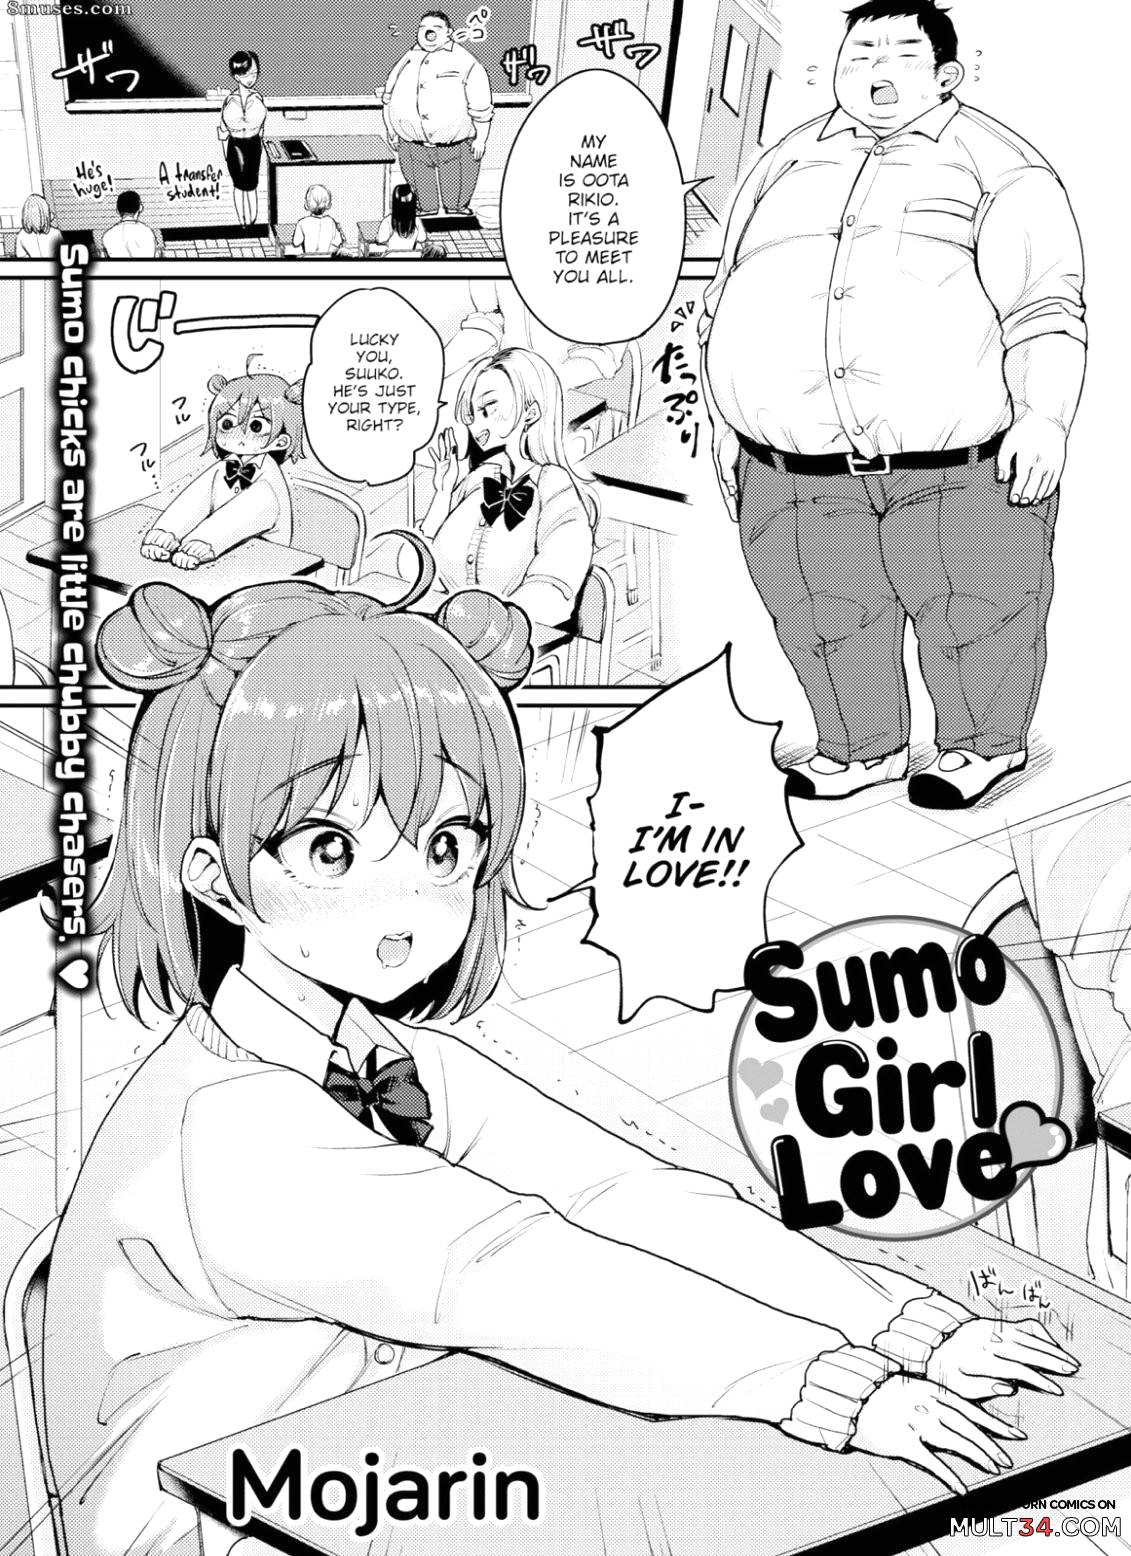 Sumo Girl Love page 1